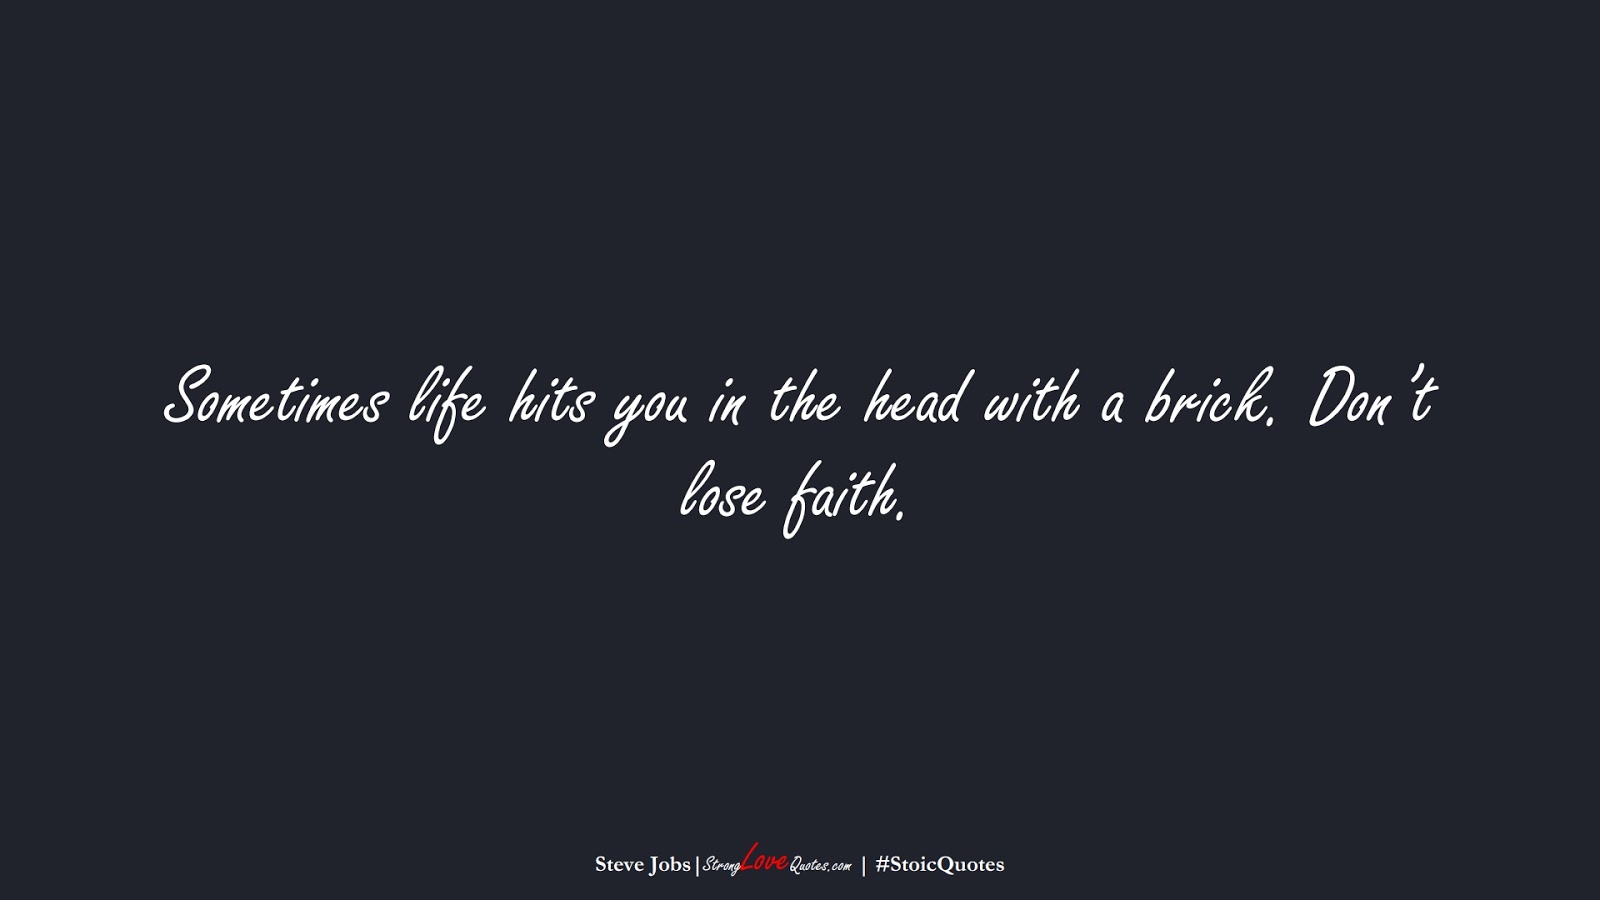 Sometimes life hits you in the head with a brick. Don’t lose faith. (Steve Jobs);  #StoicQuotes